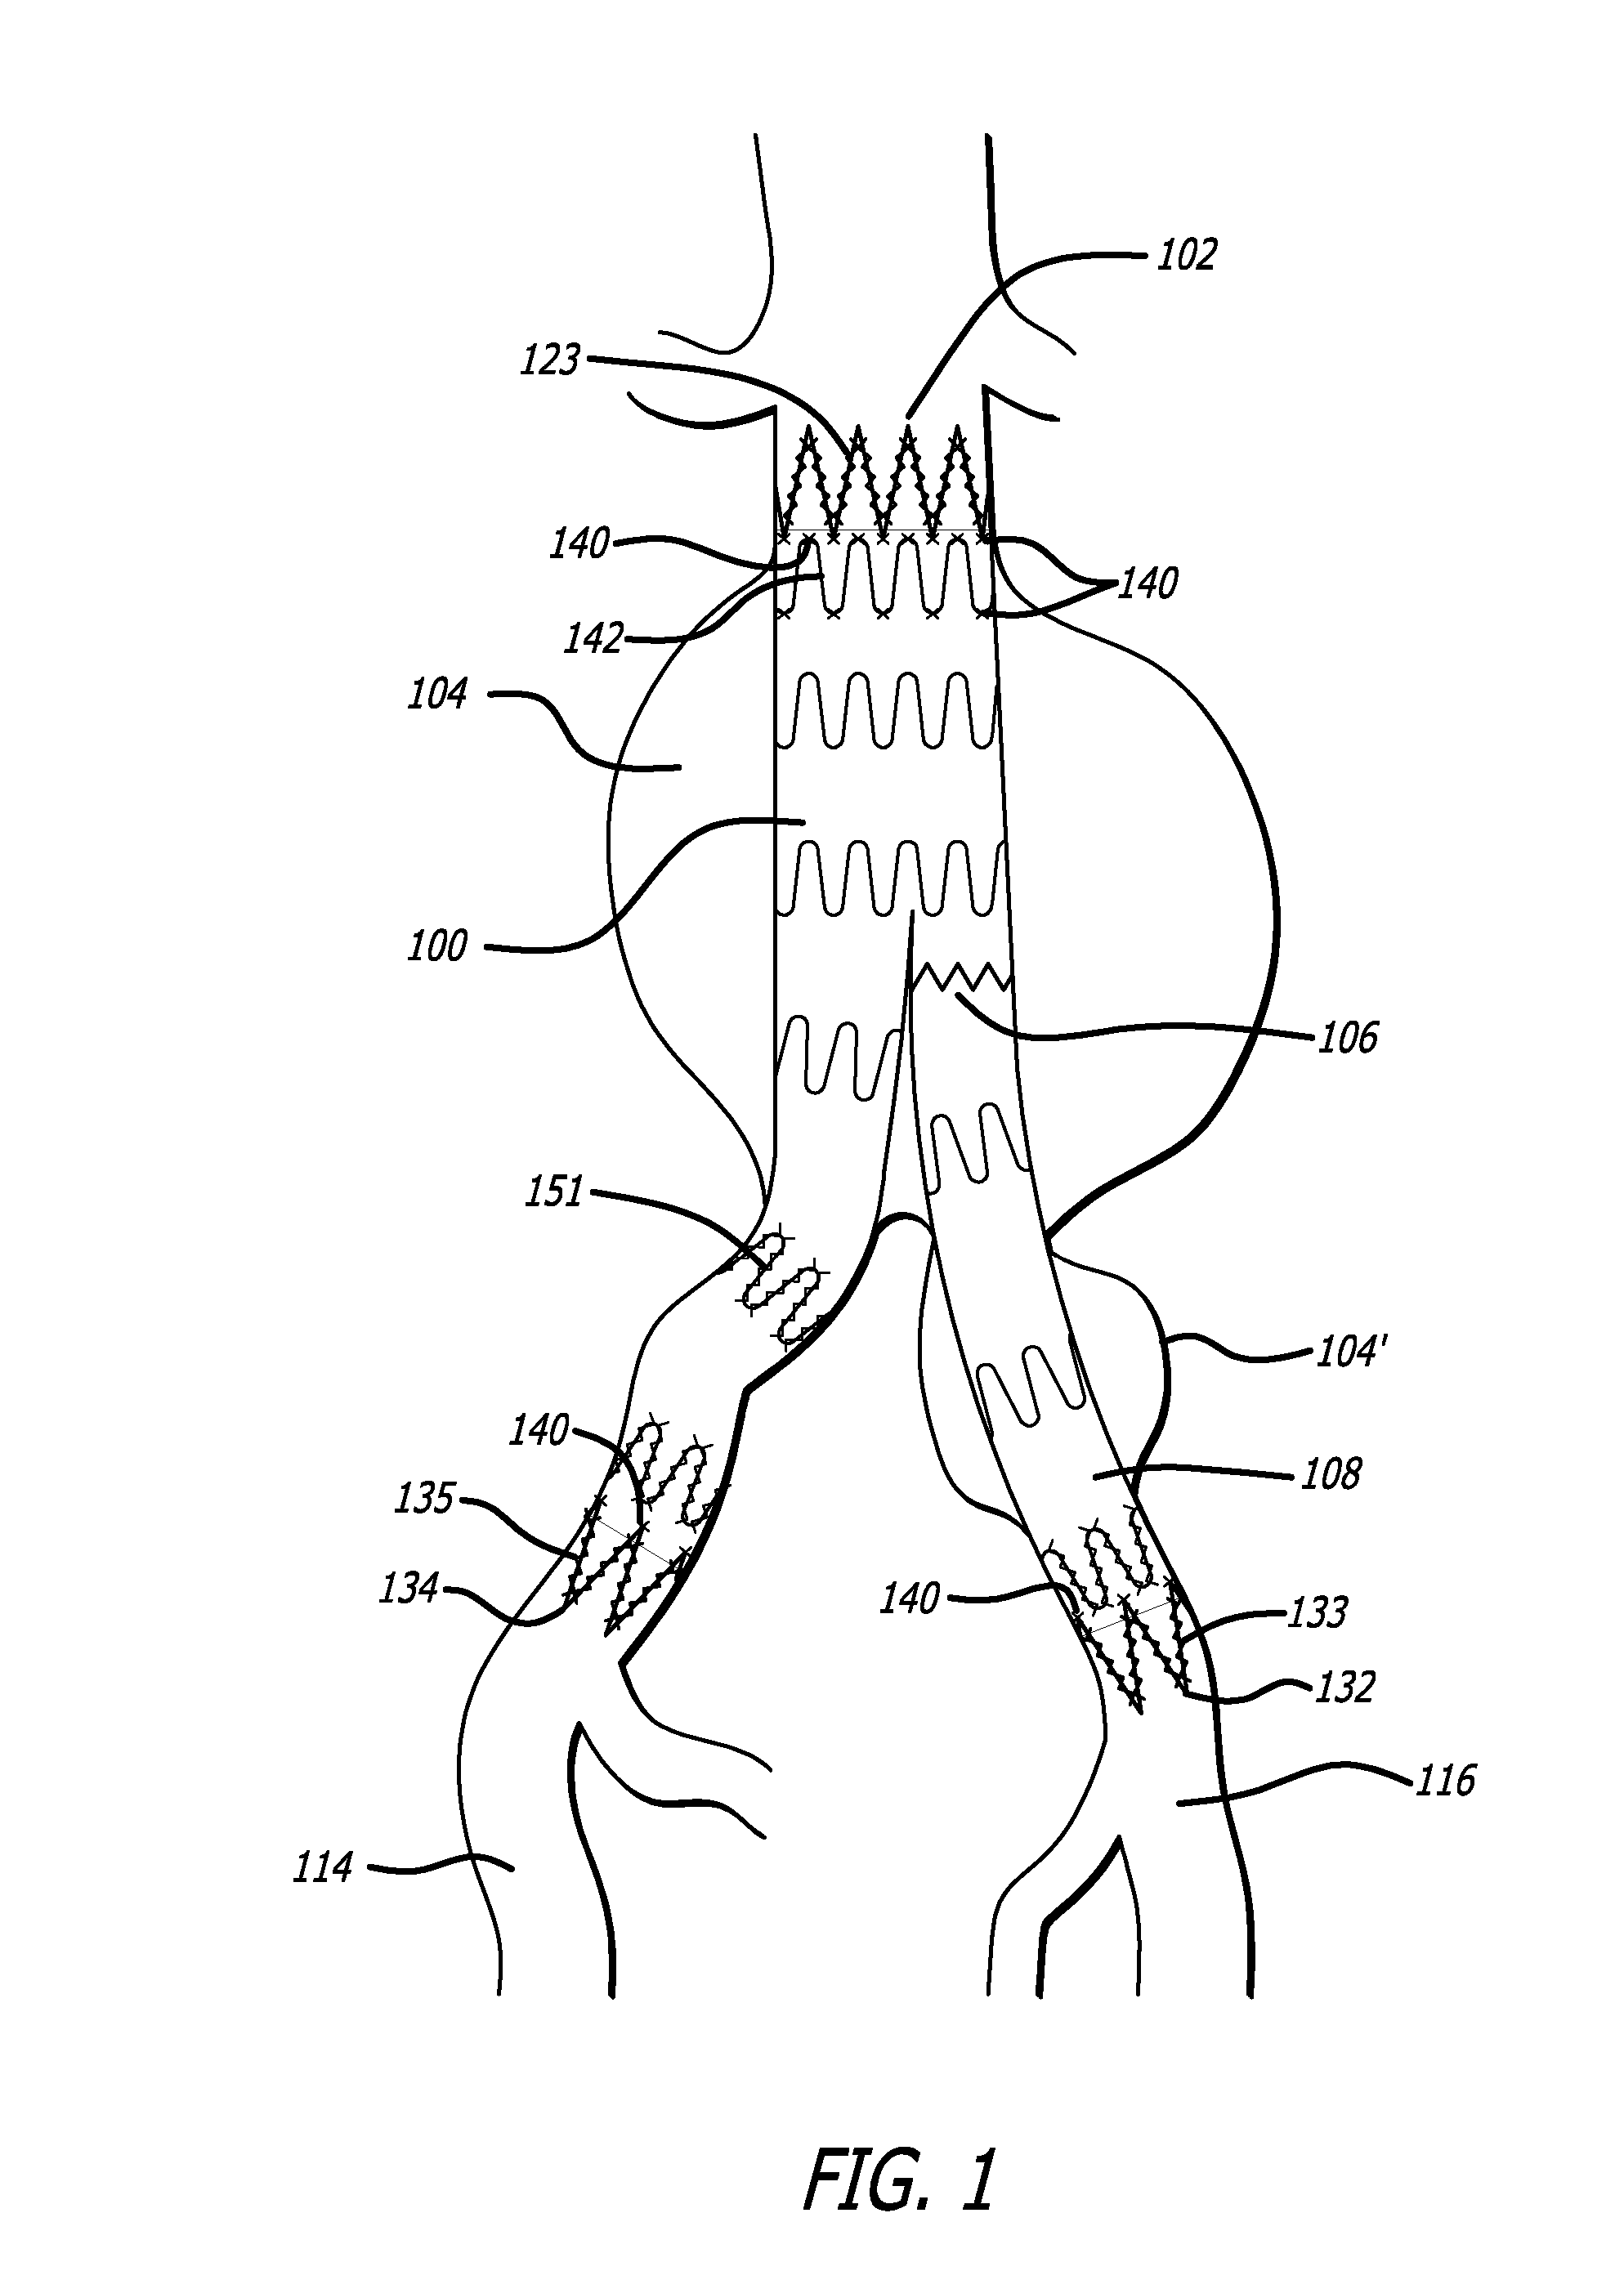 Methods and Devices for Contributing to Improved Stent Graft Fixation